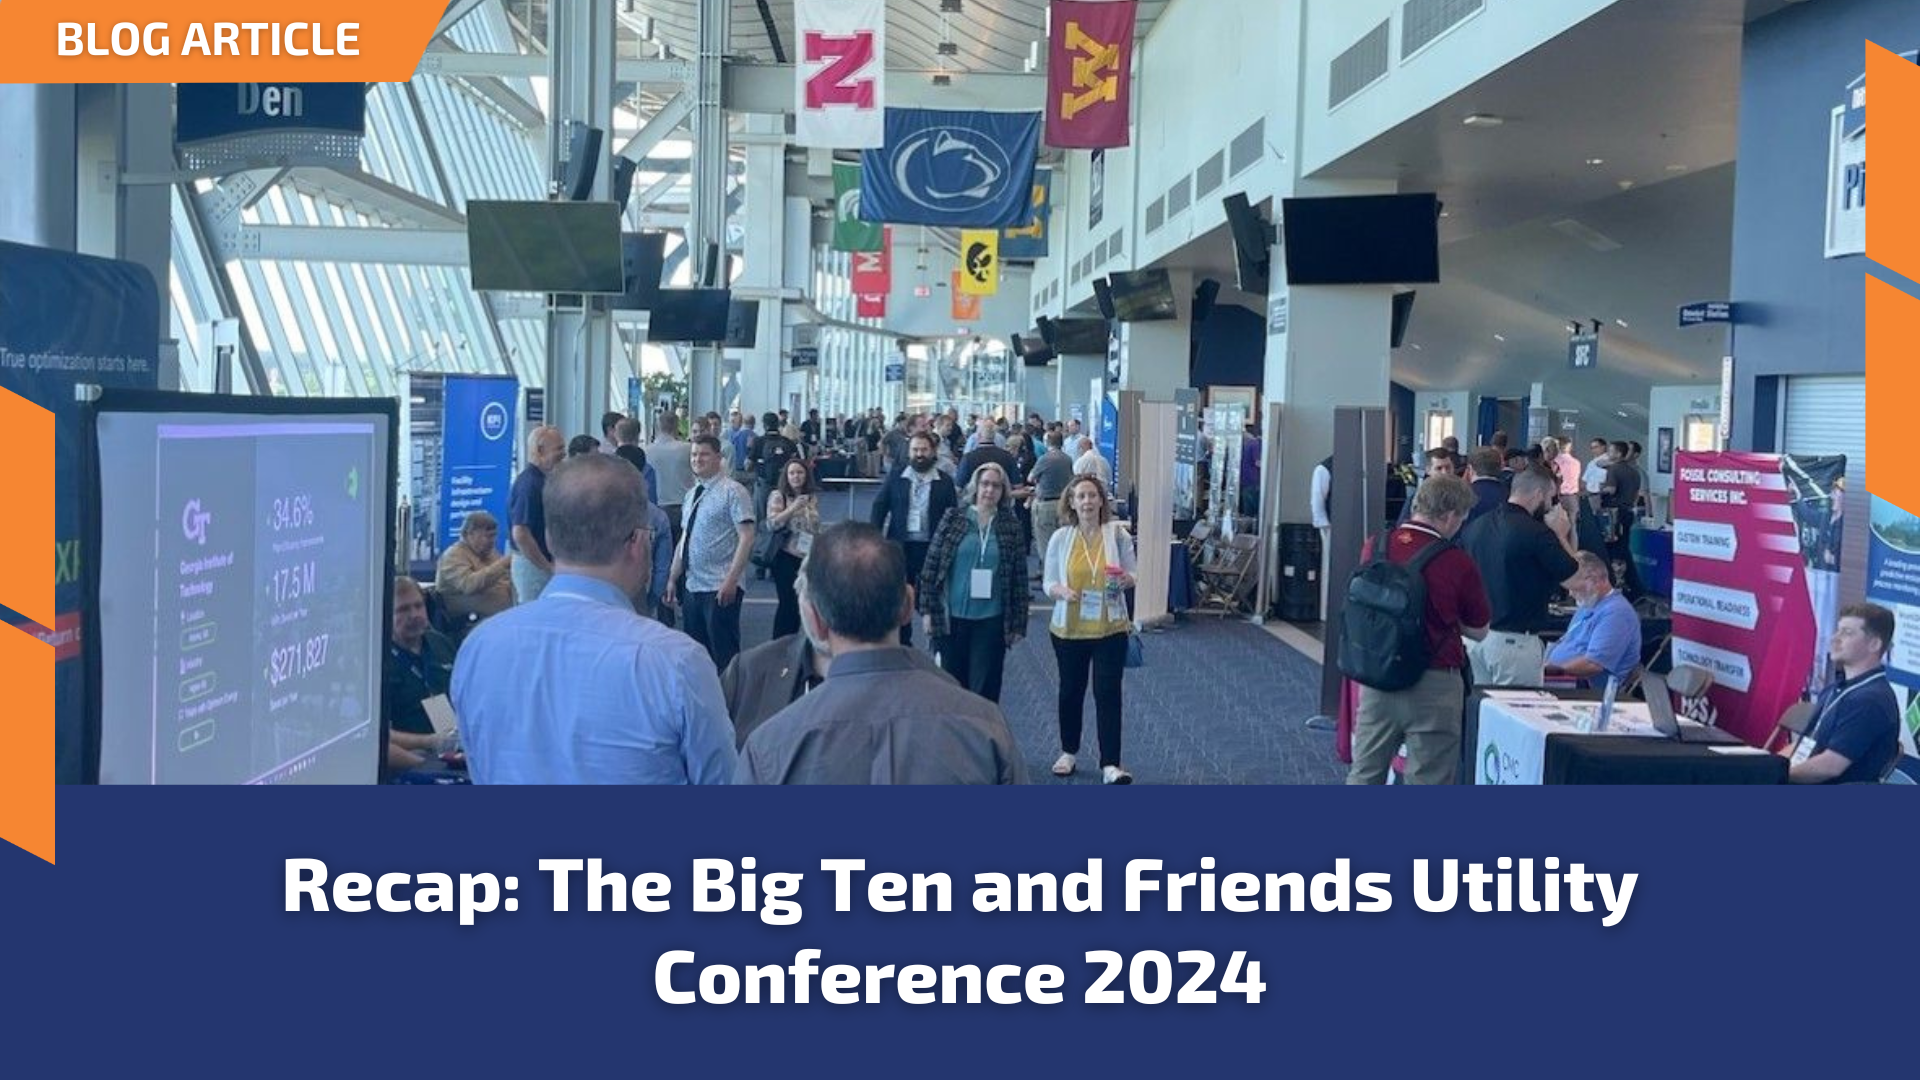 Recap: The Big Ten and Friends Utility Conference 2024